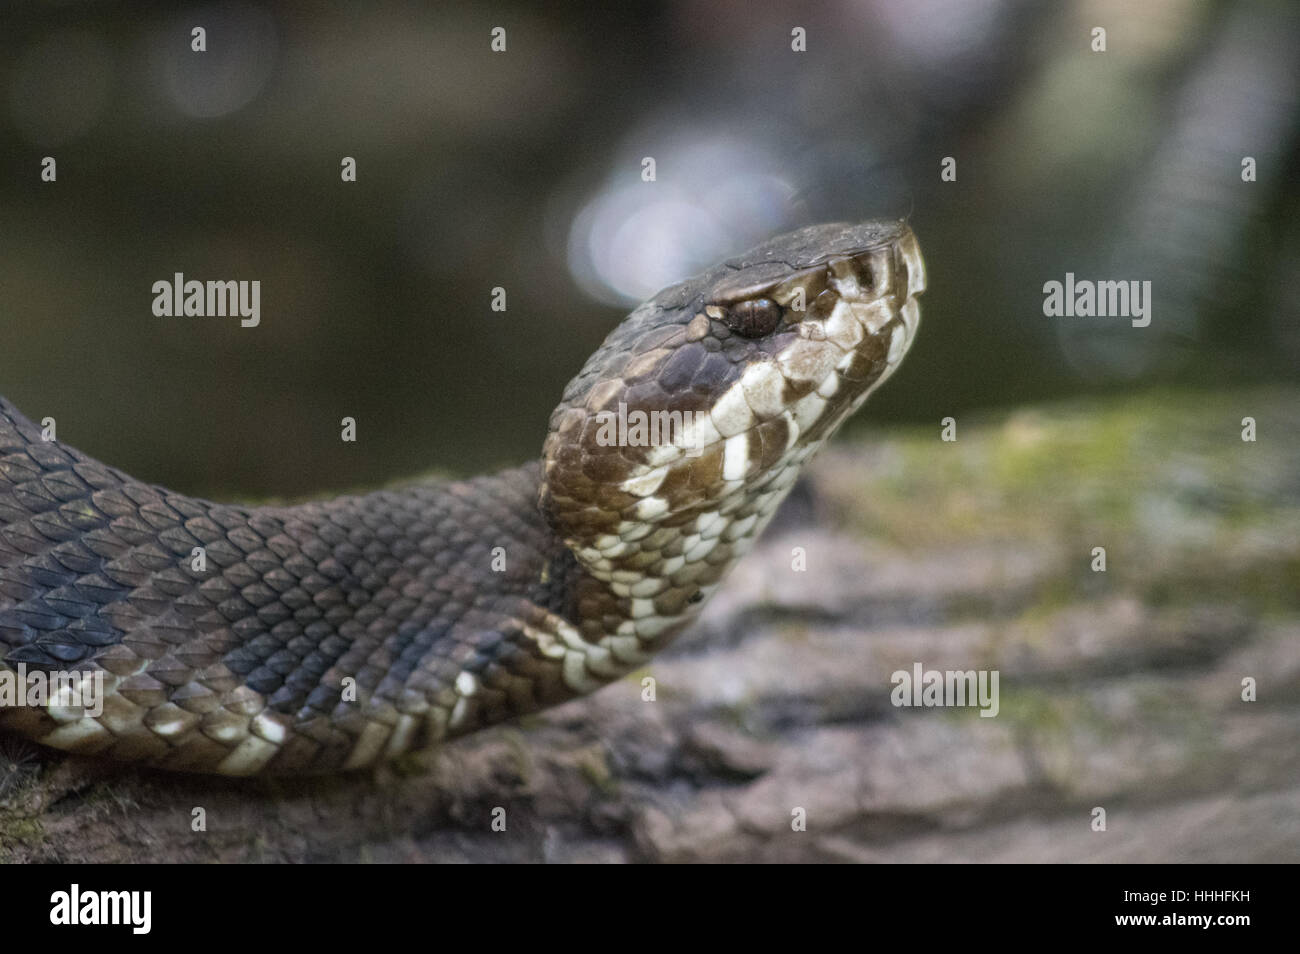 Close up, low angle shot of the head of cottonmouth snake, aka water moccasin, a venomous pit viper in Southwest Florida. Stock Photo